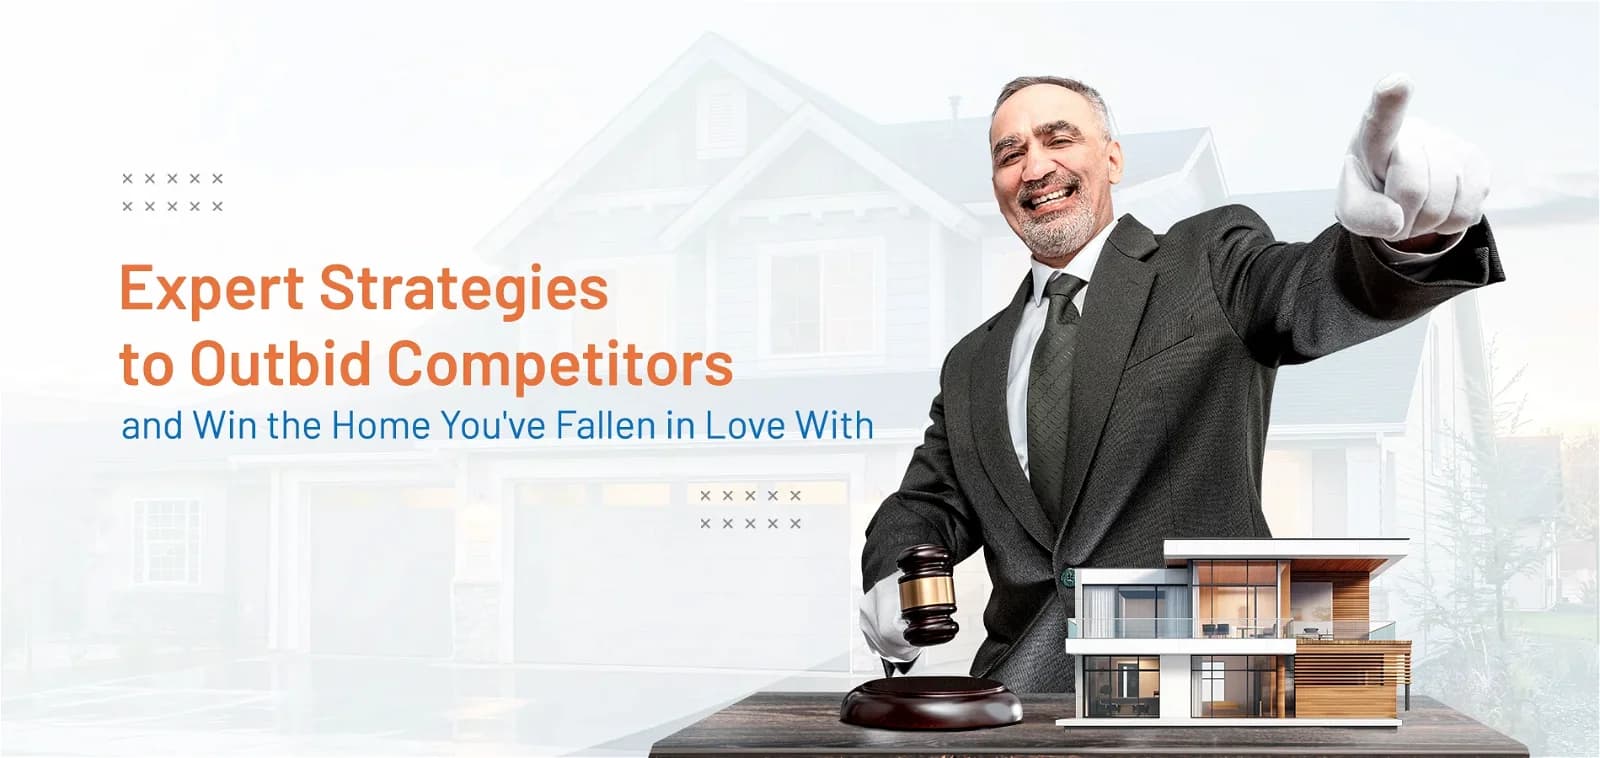 Expert Strategies to Outbid Competitors and Win the Home You’ve Fallen in Love With